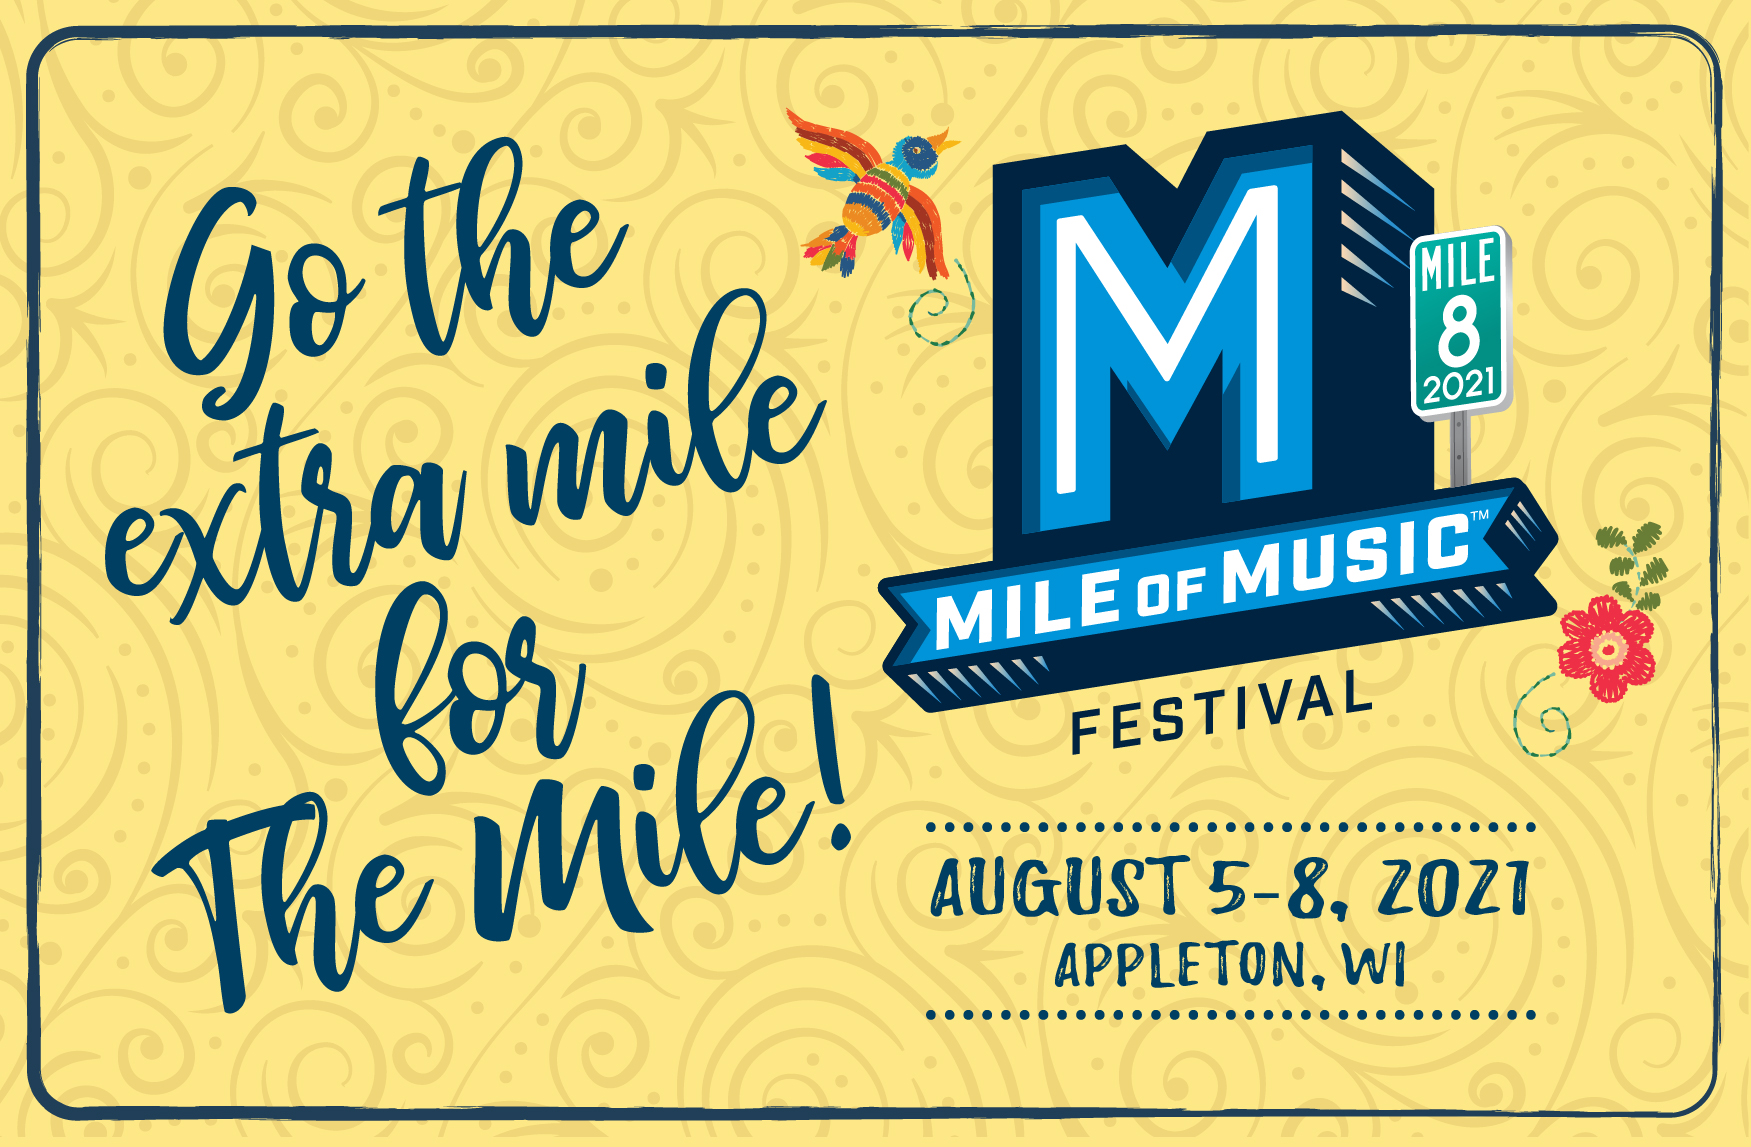 Mile of Music Go the extra Mile for The Mile!